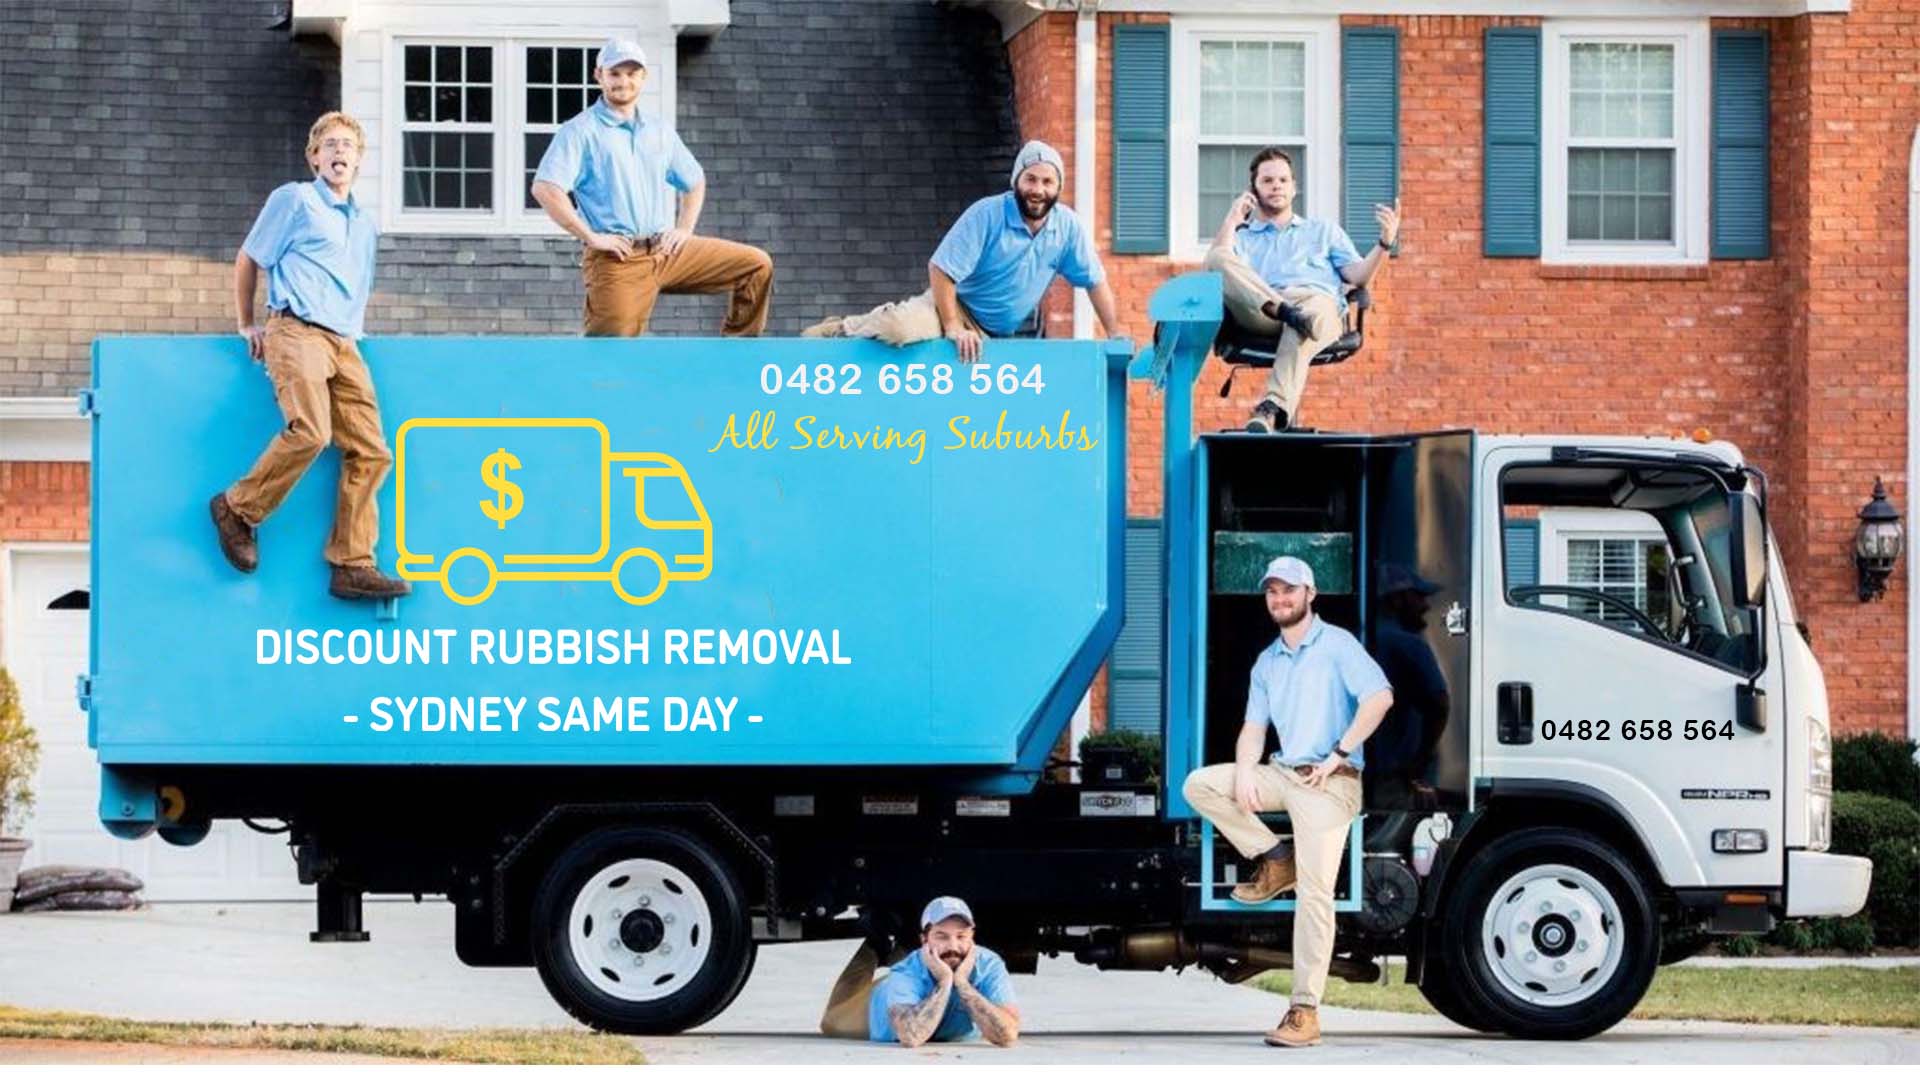 Cheap rubbish removal in Sydney.